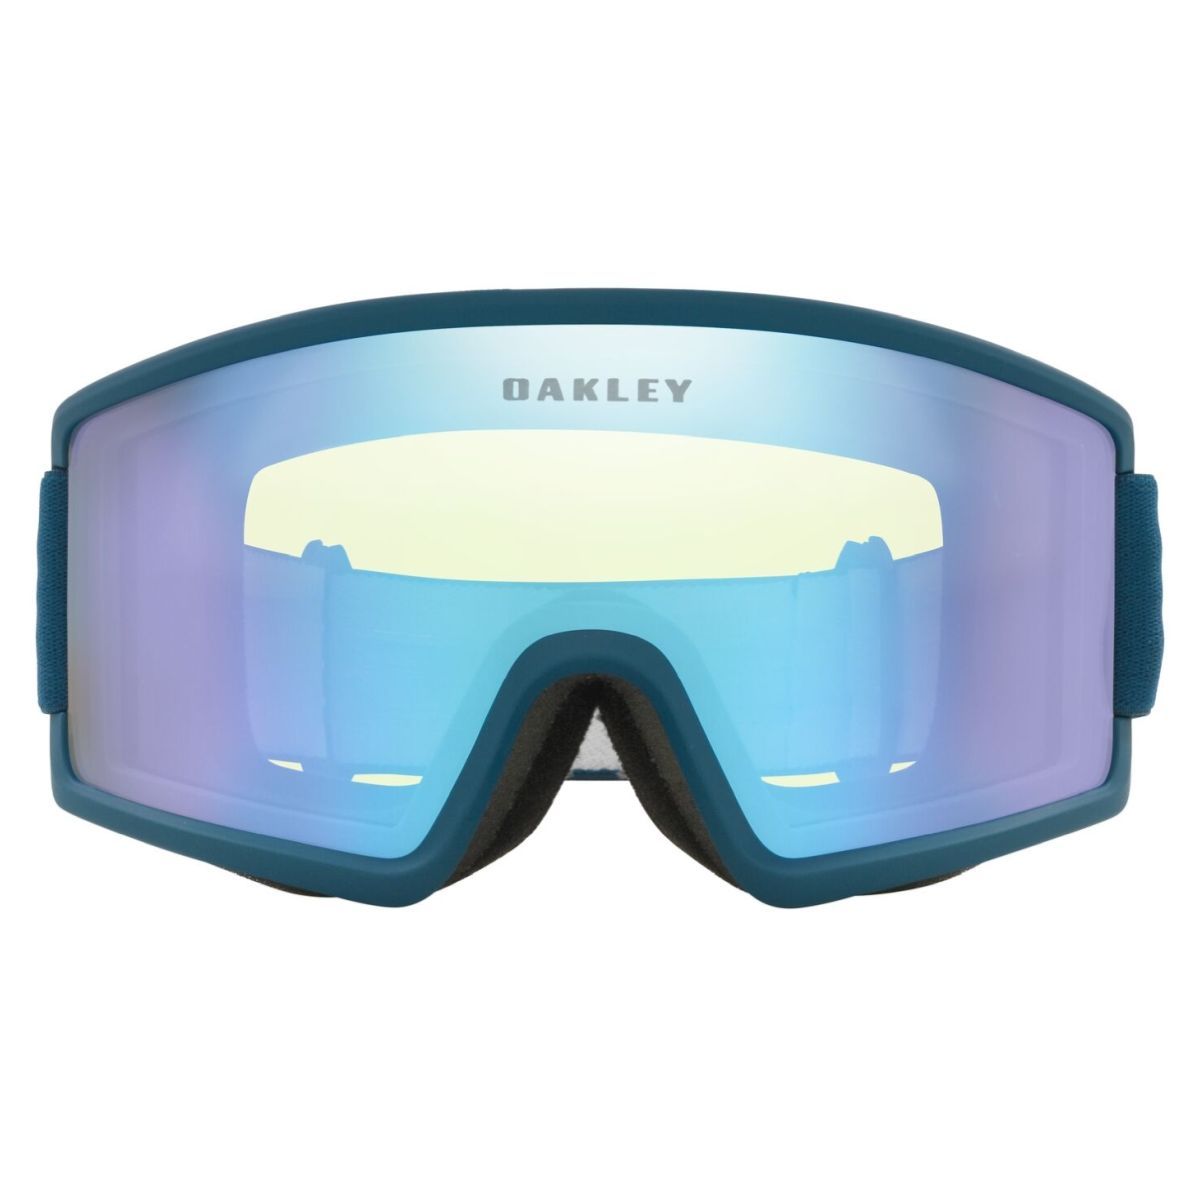 OAKLEY TARGET LINE M SNOW GOGGLES 7121/10/00